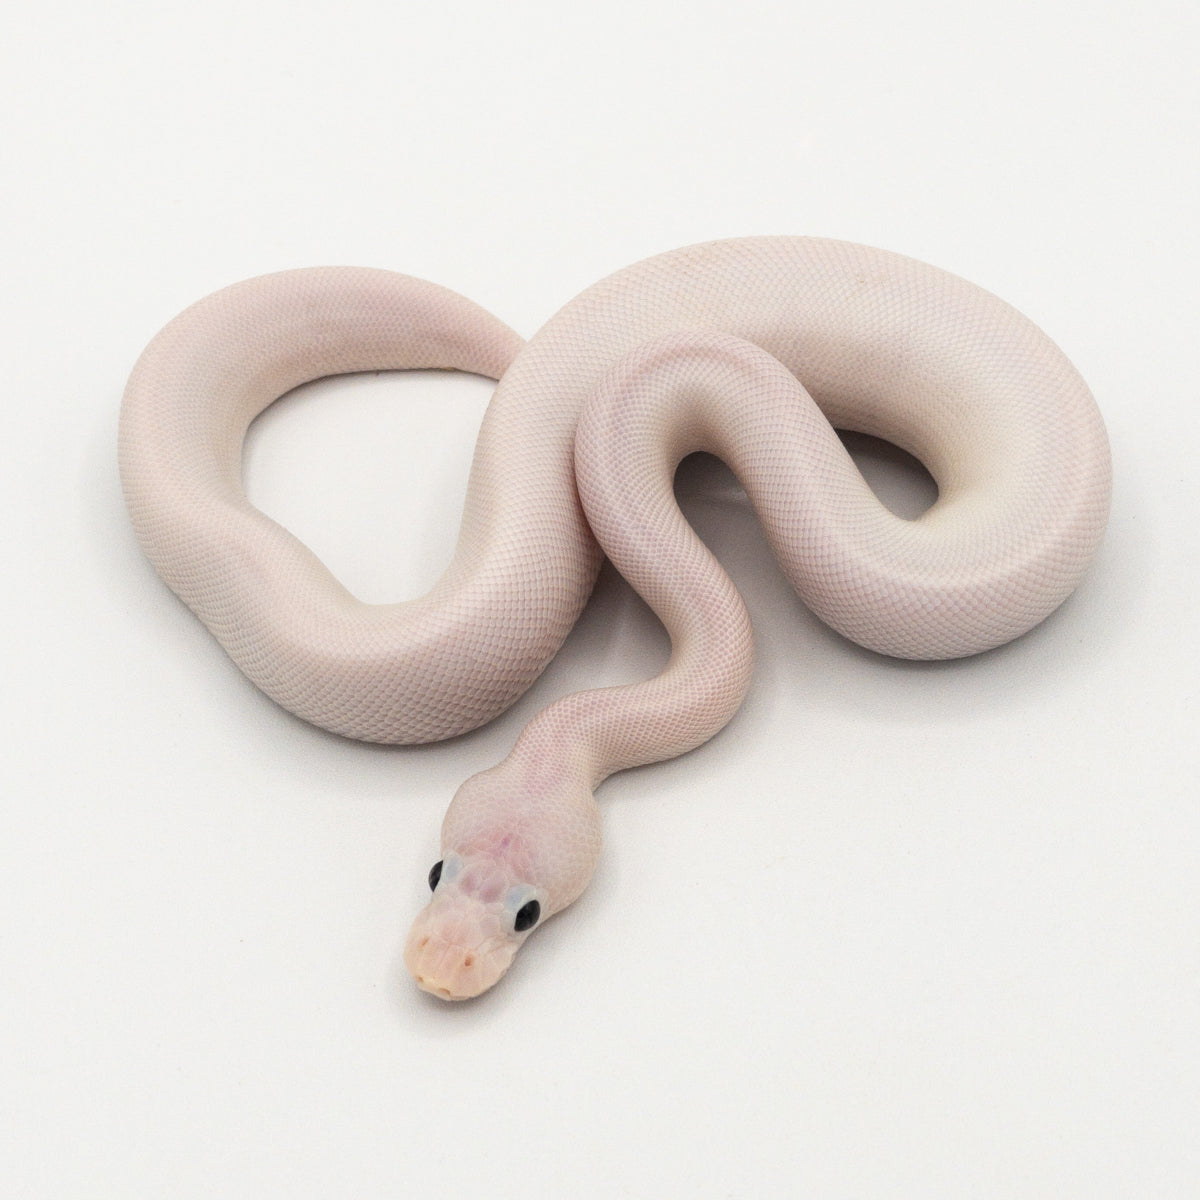 Rare, leucistic white snake with blue eyes found in Mississippi